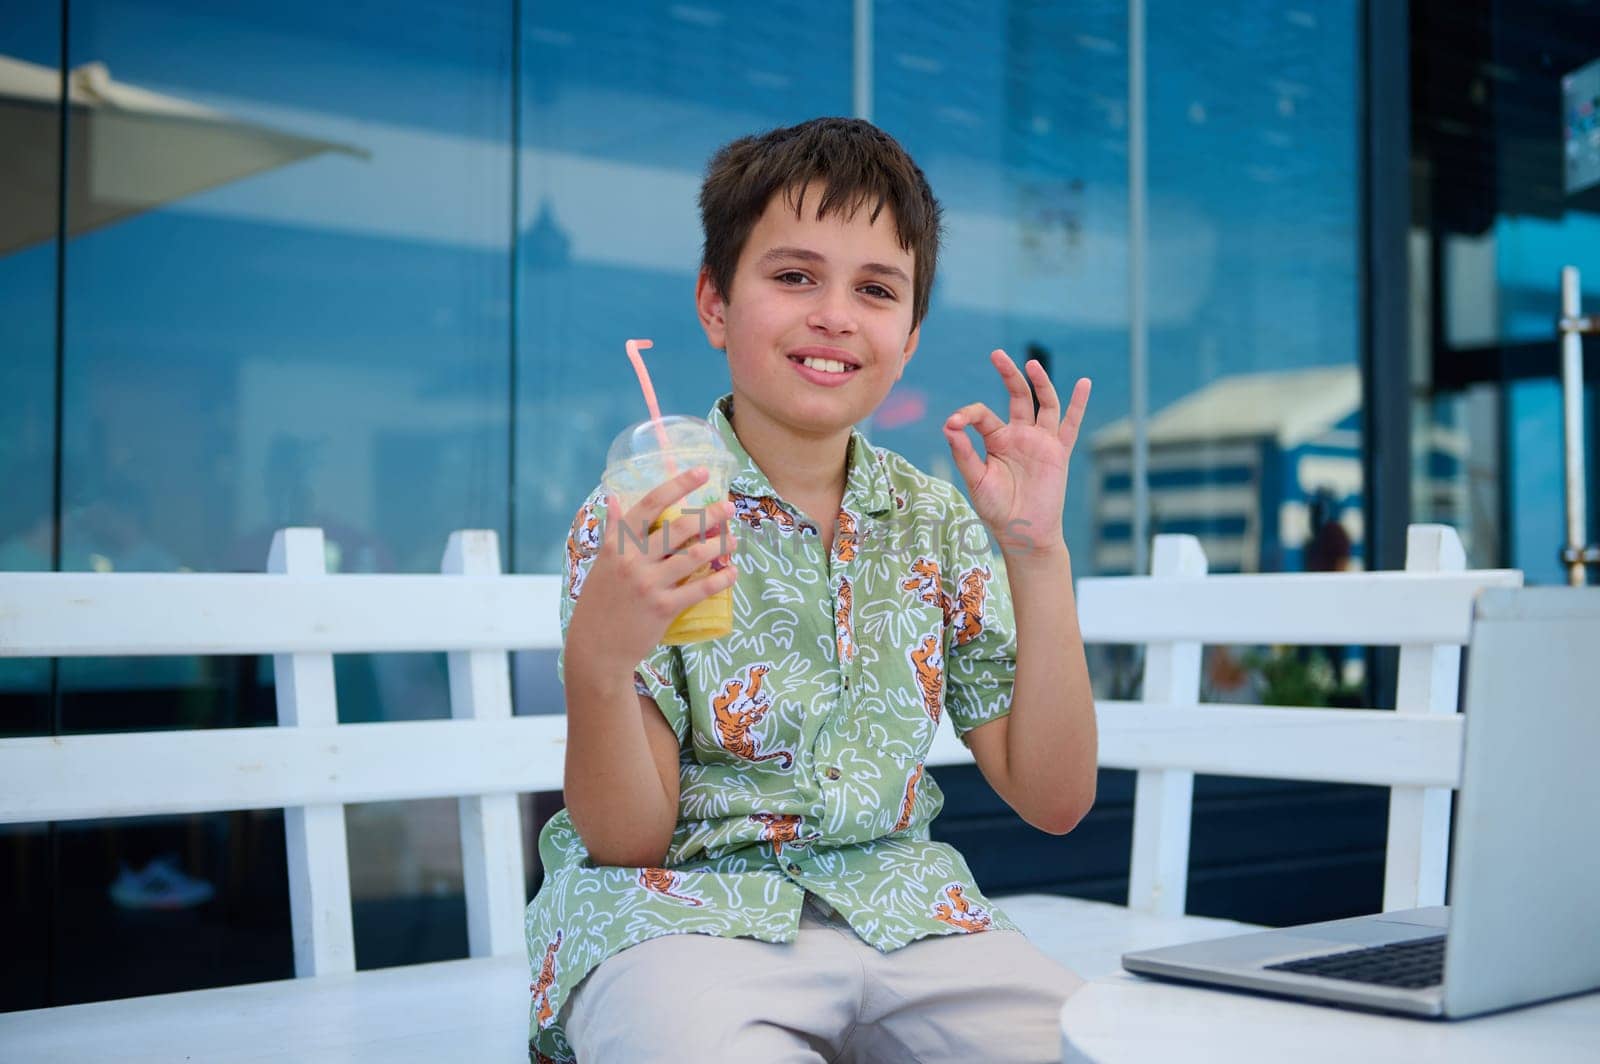 Handsome pre teen boy in summer shirt, holding a glass of freshy squeezed orange juice, showing OK hand sign at camera by artgf